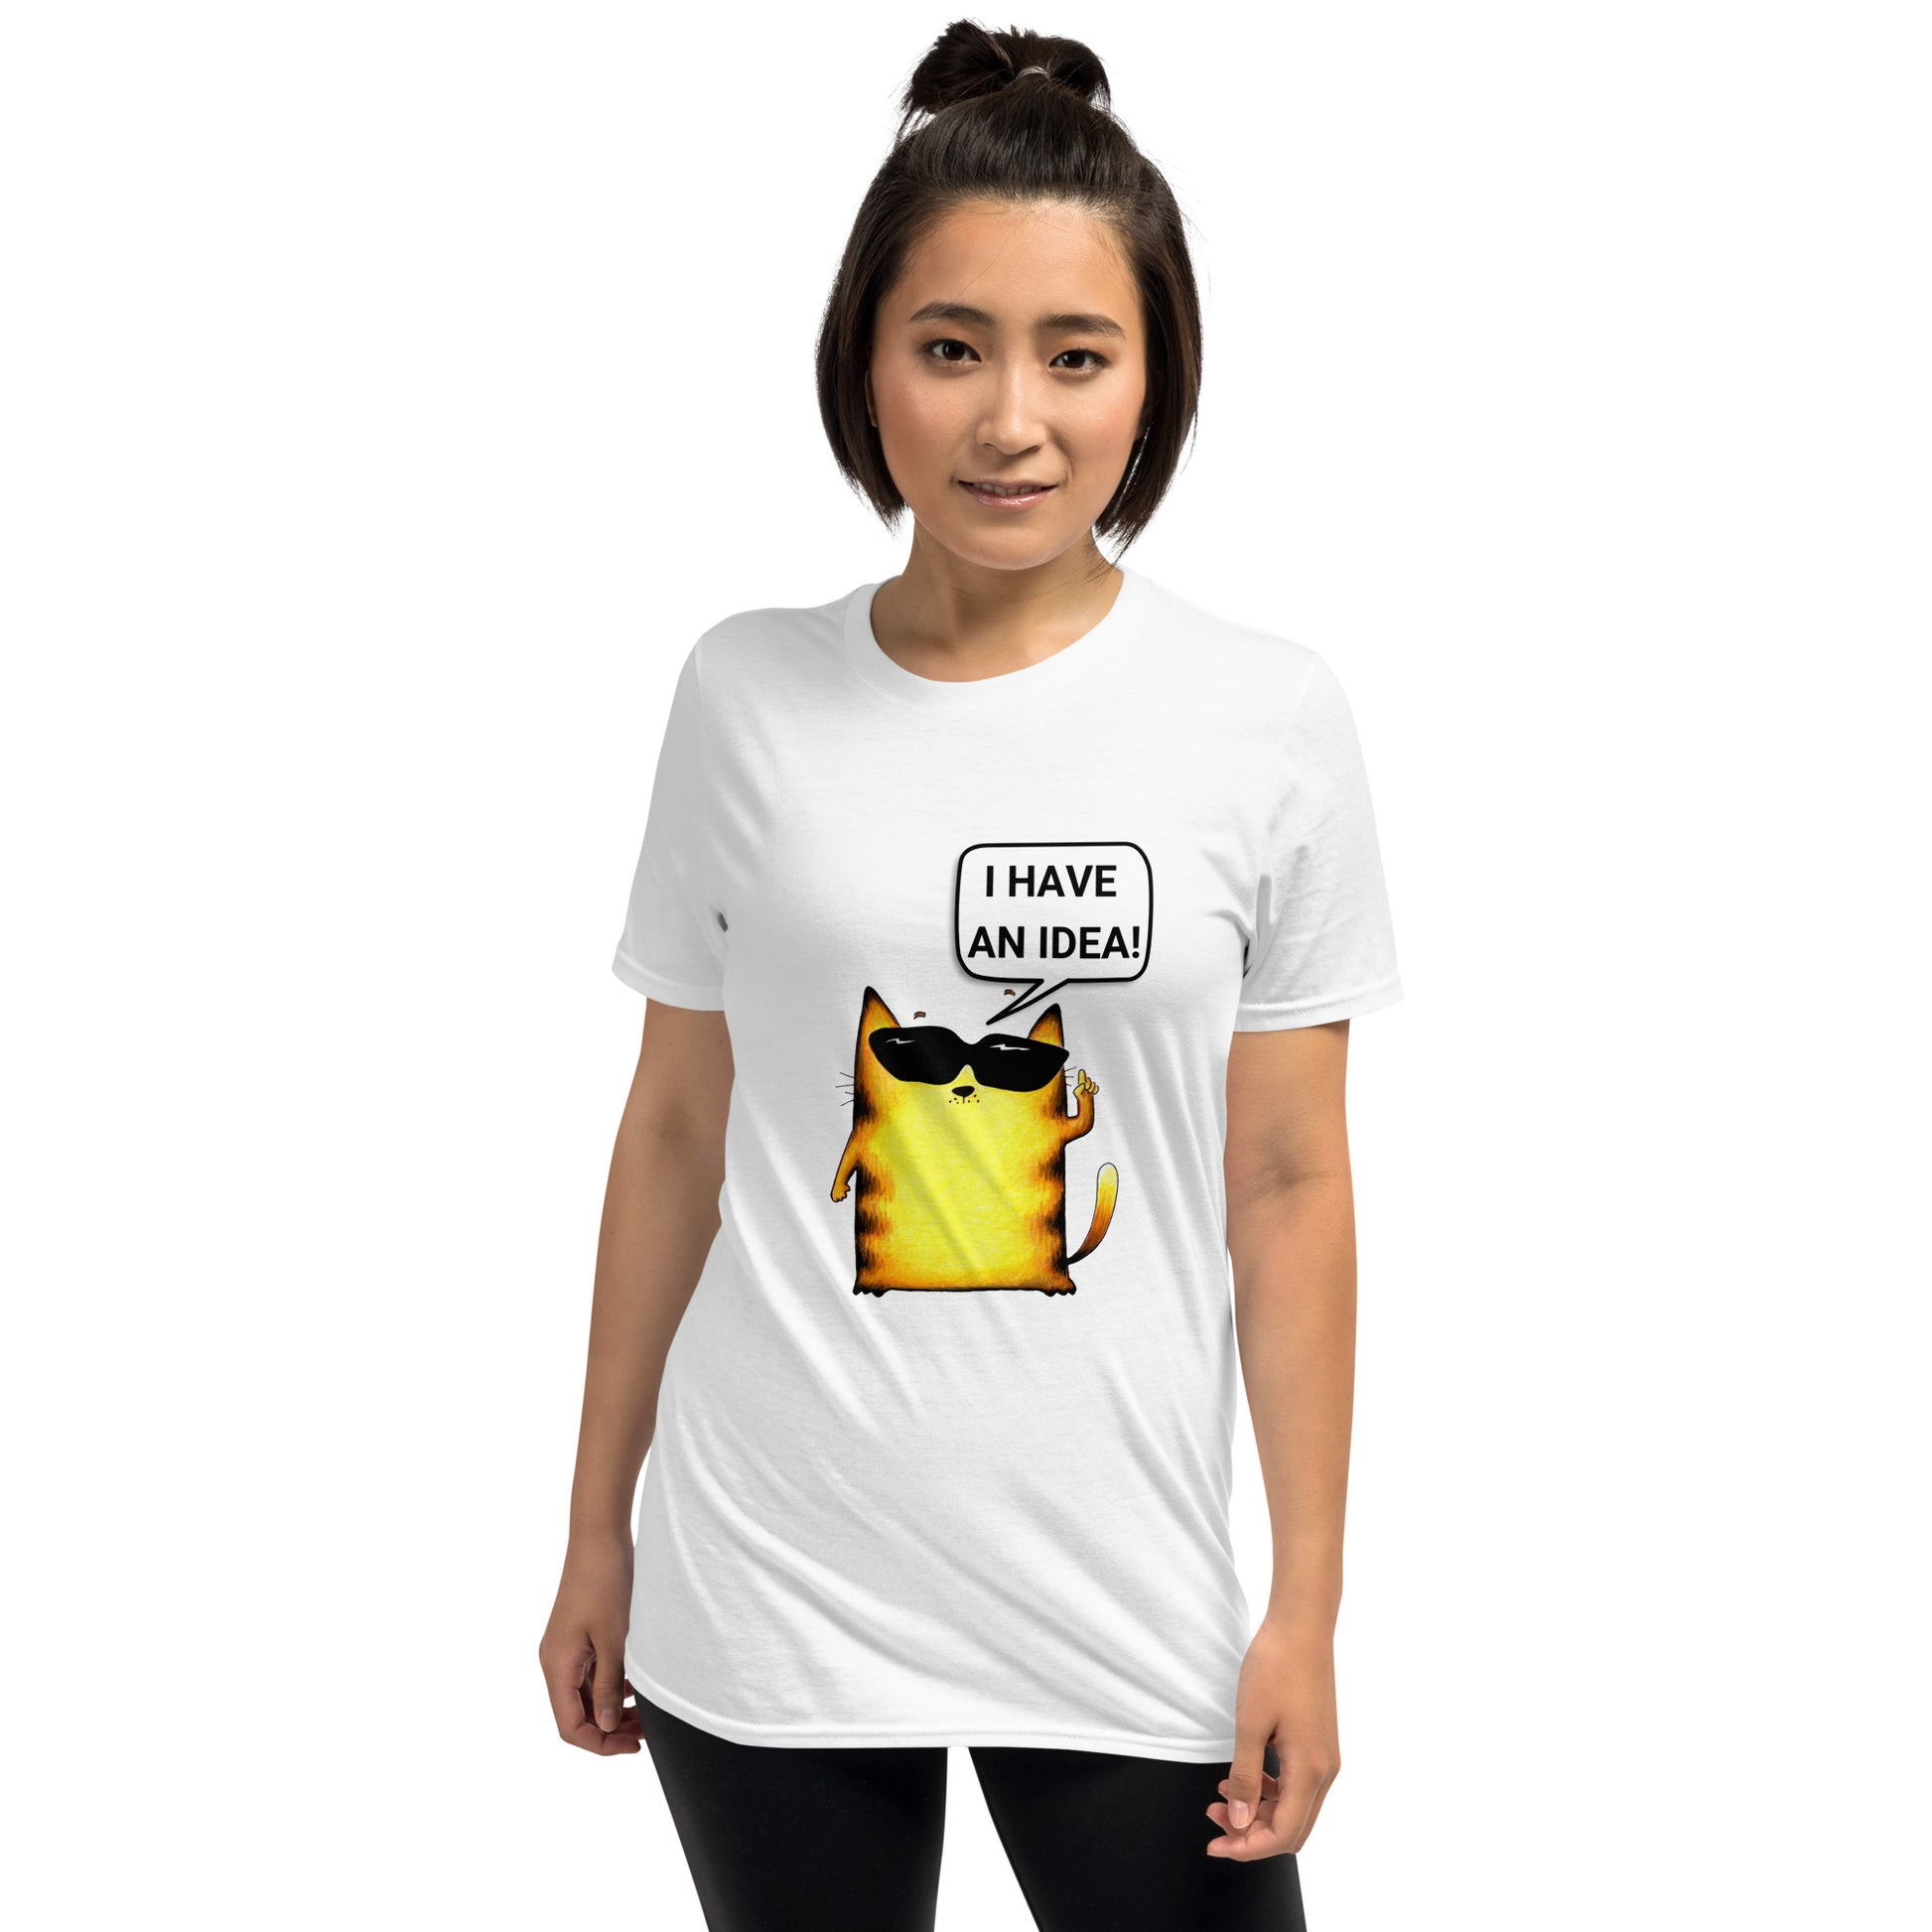 White t-shirt for ladies with yellow cat design